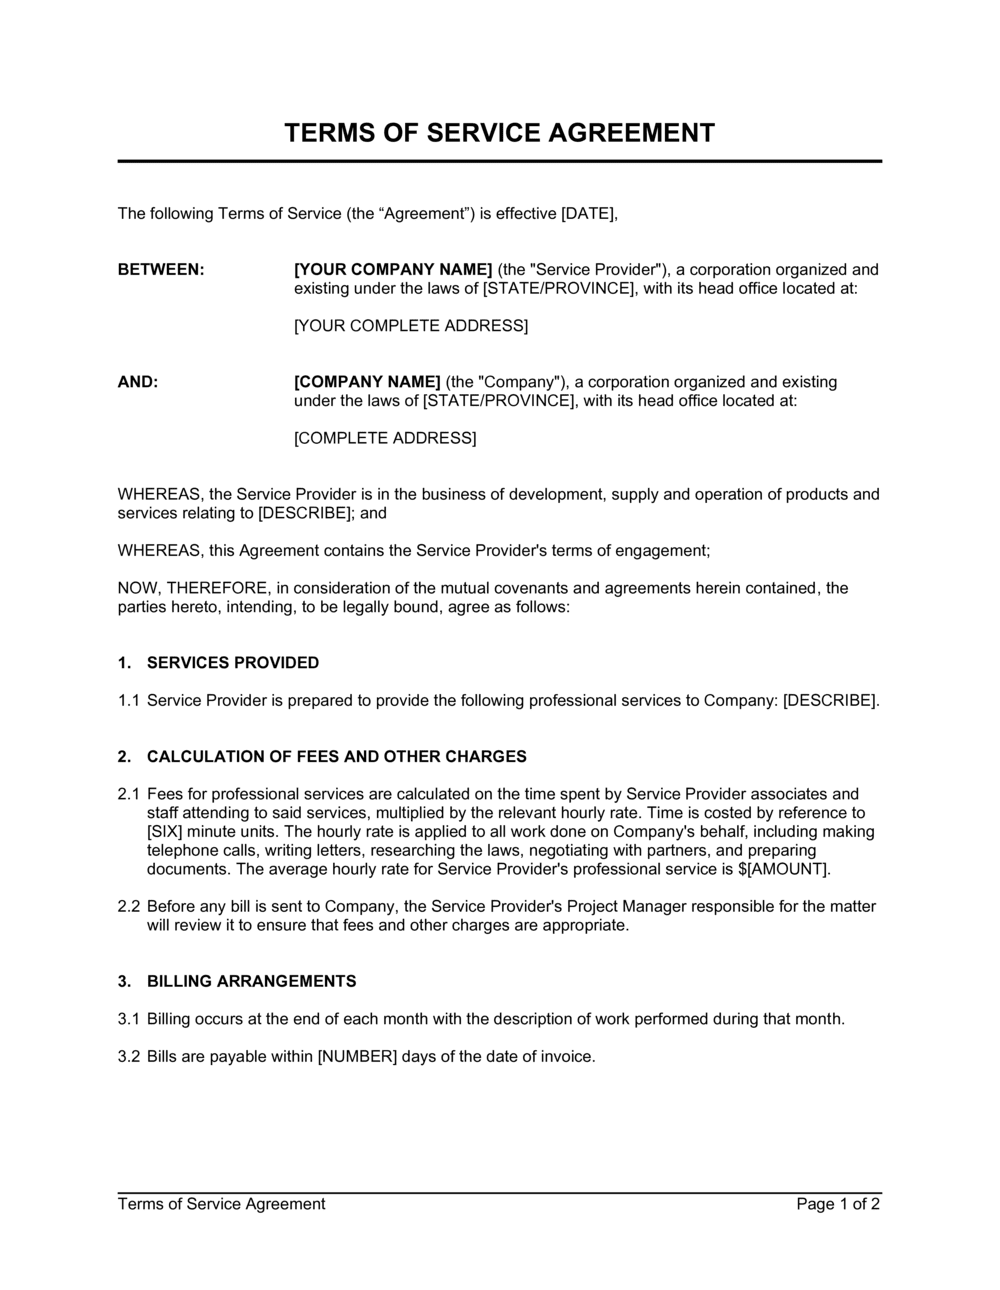 Terms of Service Agreement Template  by Business-in-a-Box™ Within free terms of service agreement template